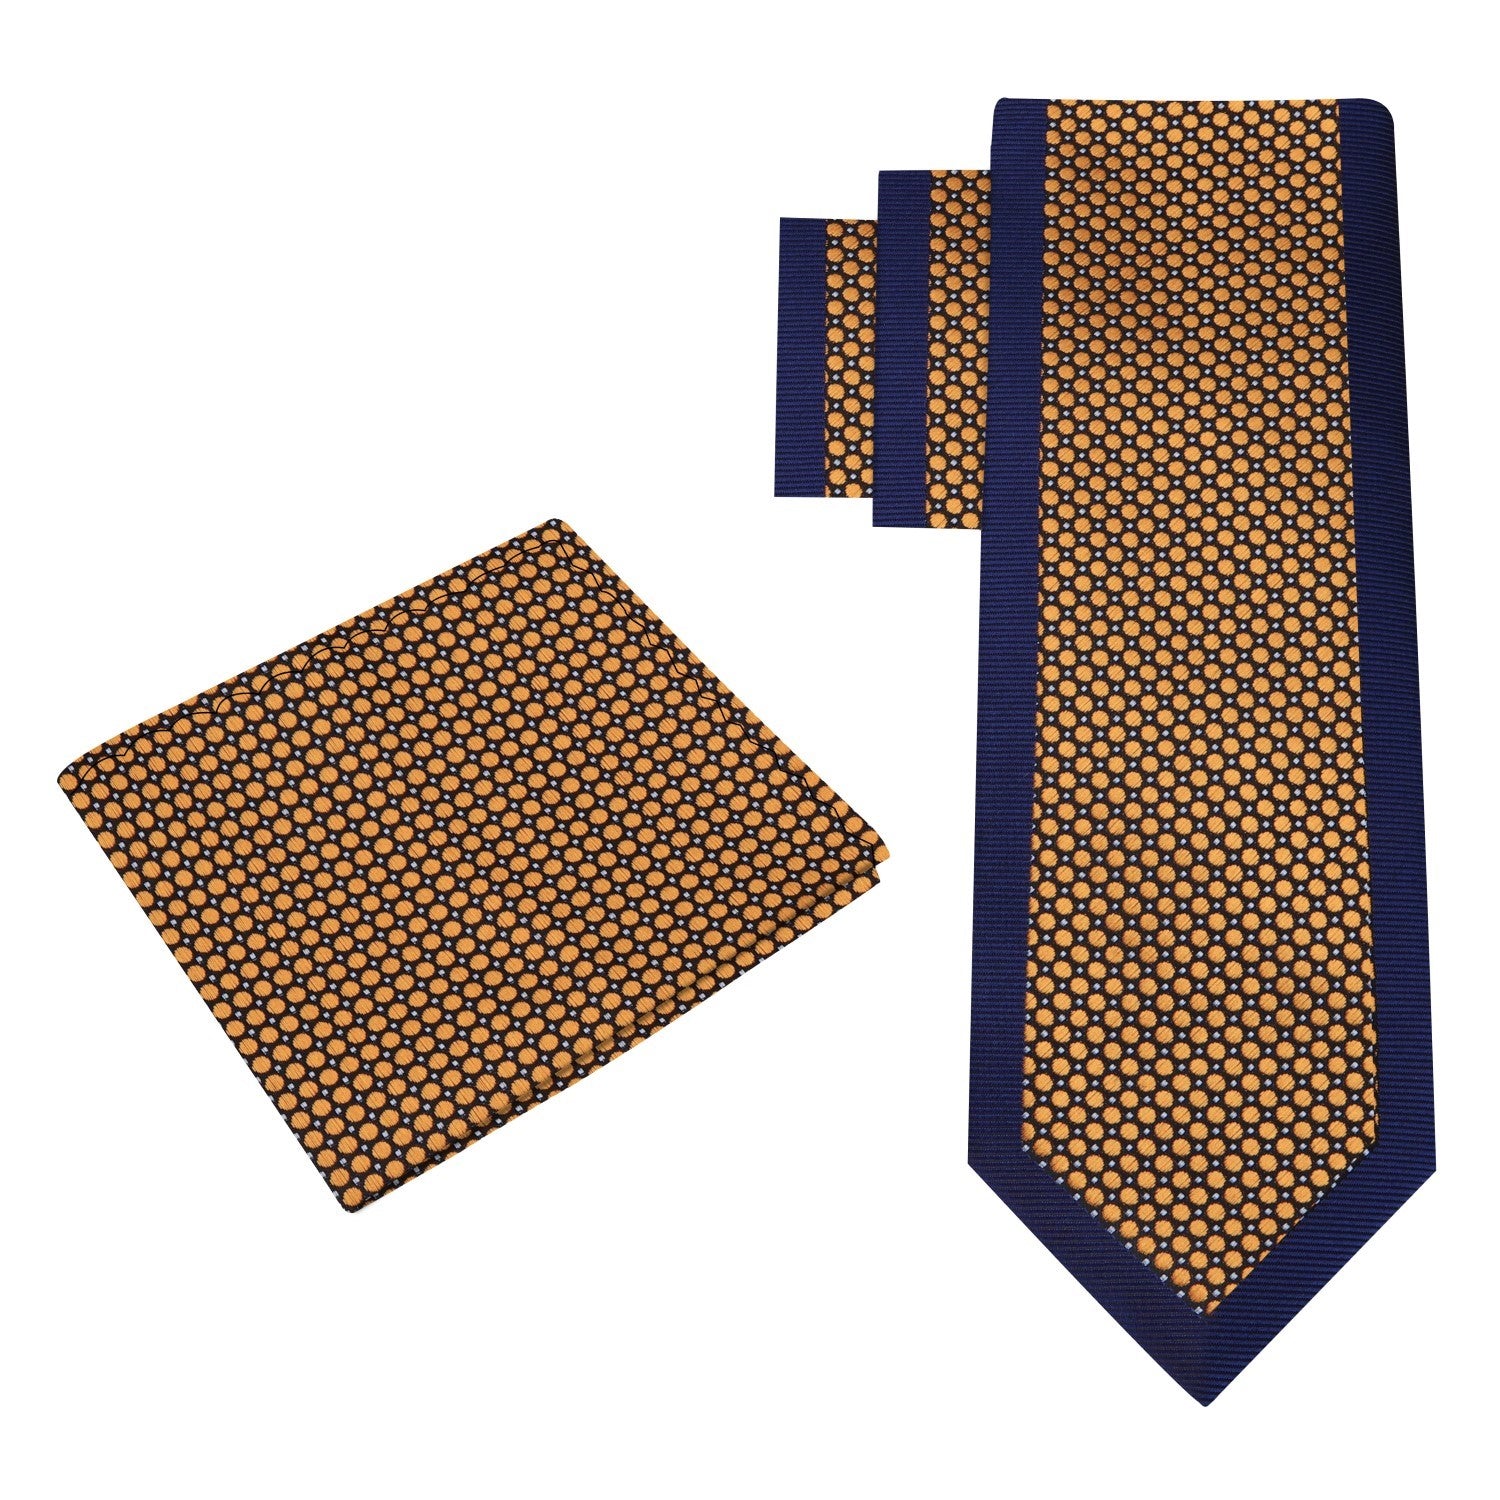 Alt View: Blue, Gold Geometric Tie and Pocket Square